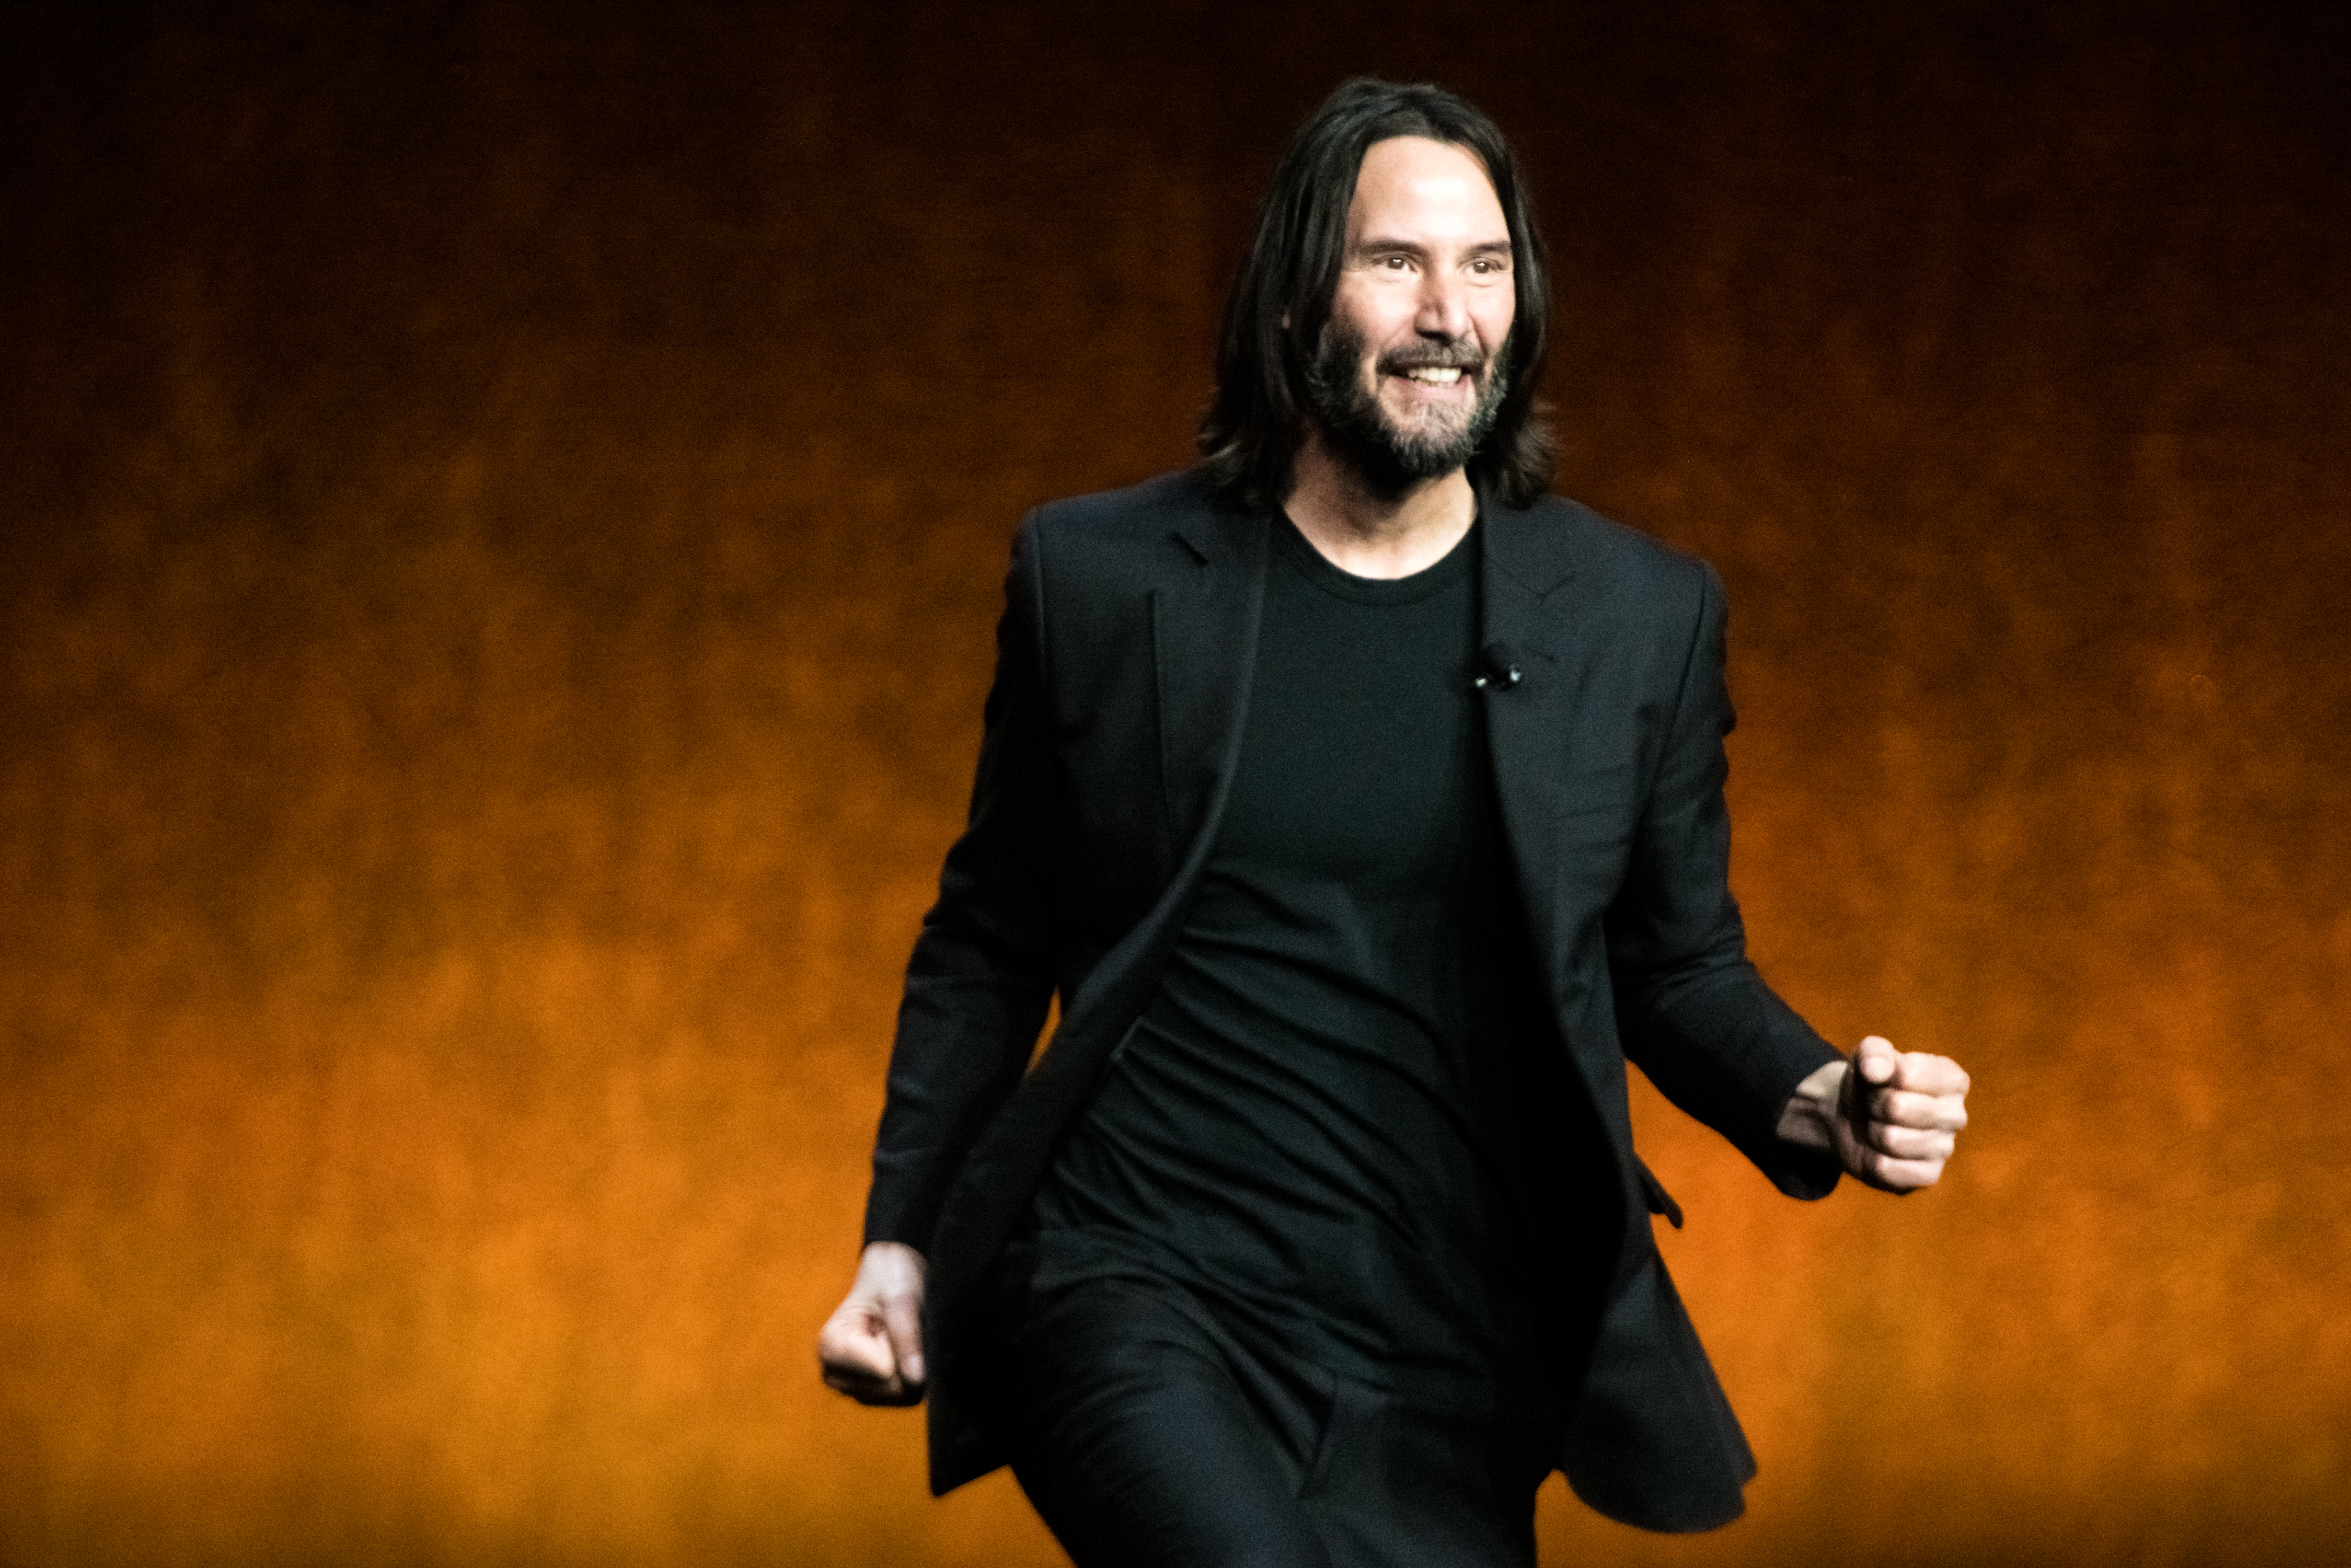 Keanu Reeves presents the movie "John Wick: Chapter 4" during Lionsgate exclusive presentation in Las Vegas, Nevada, on April 28, 2022. | Source: Getty Images